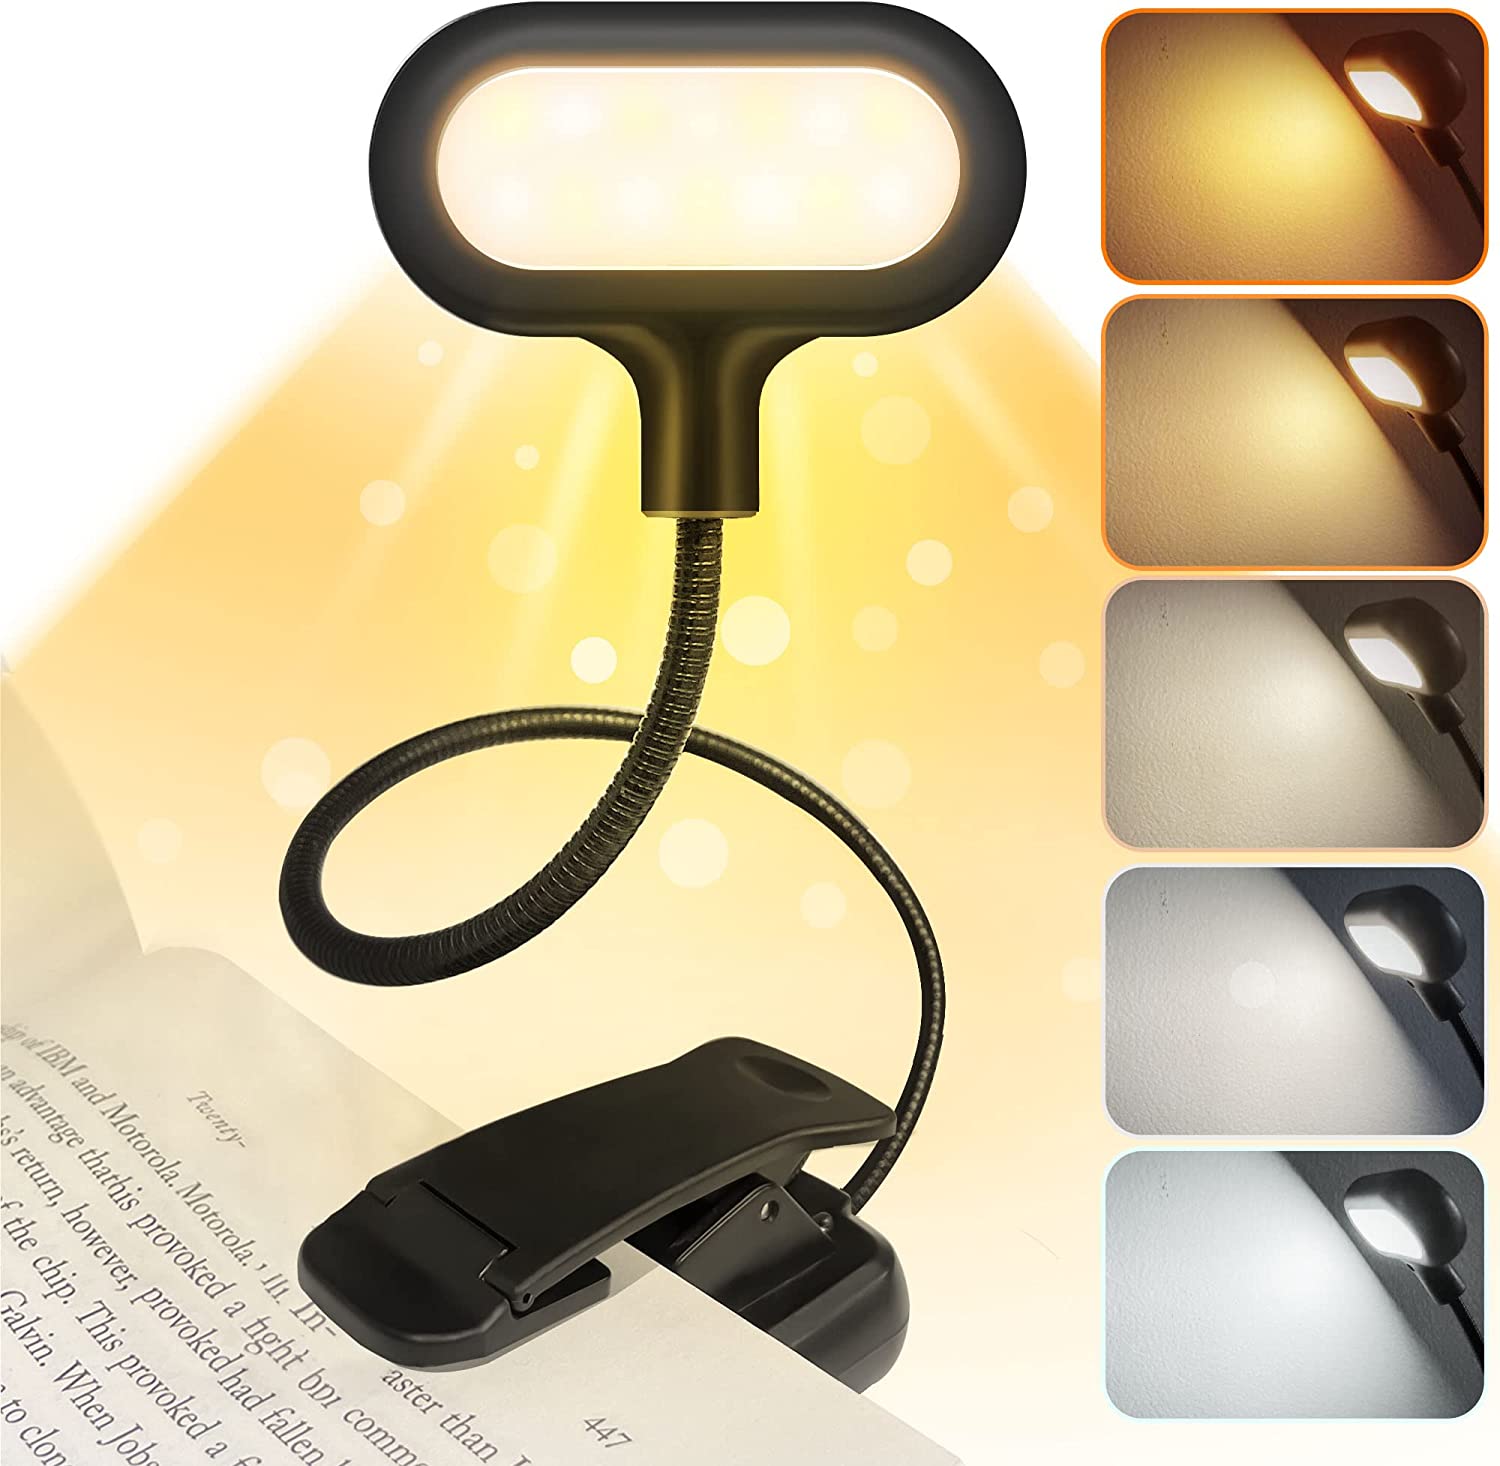 Best book lights for reading in bed